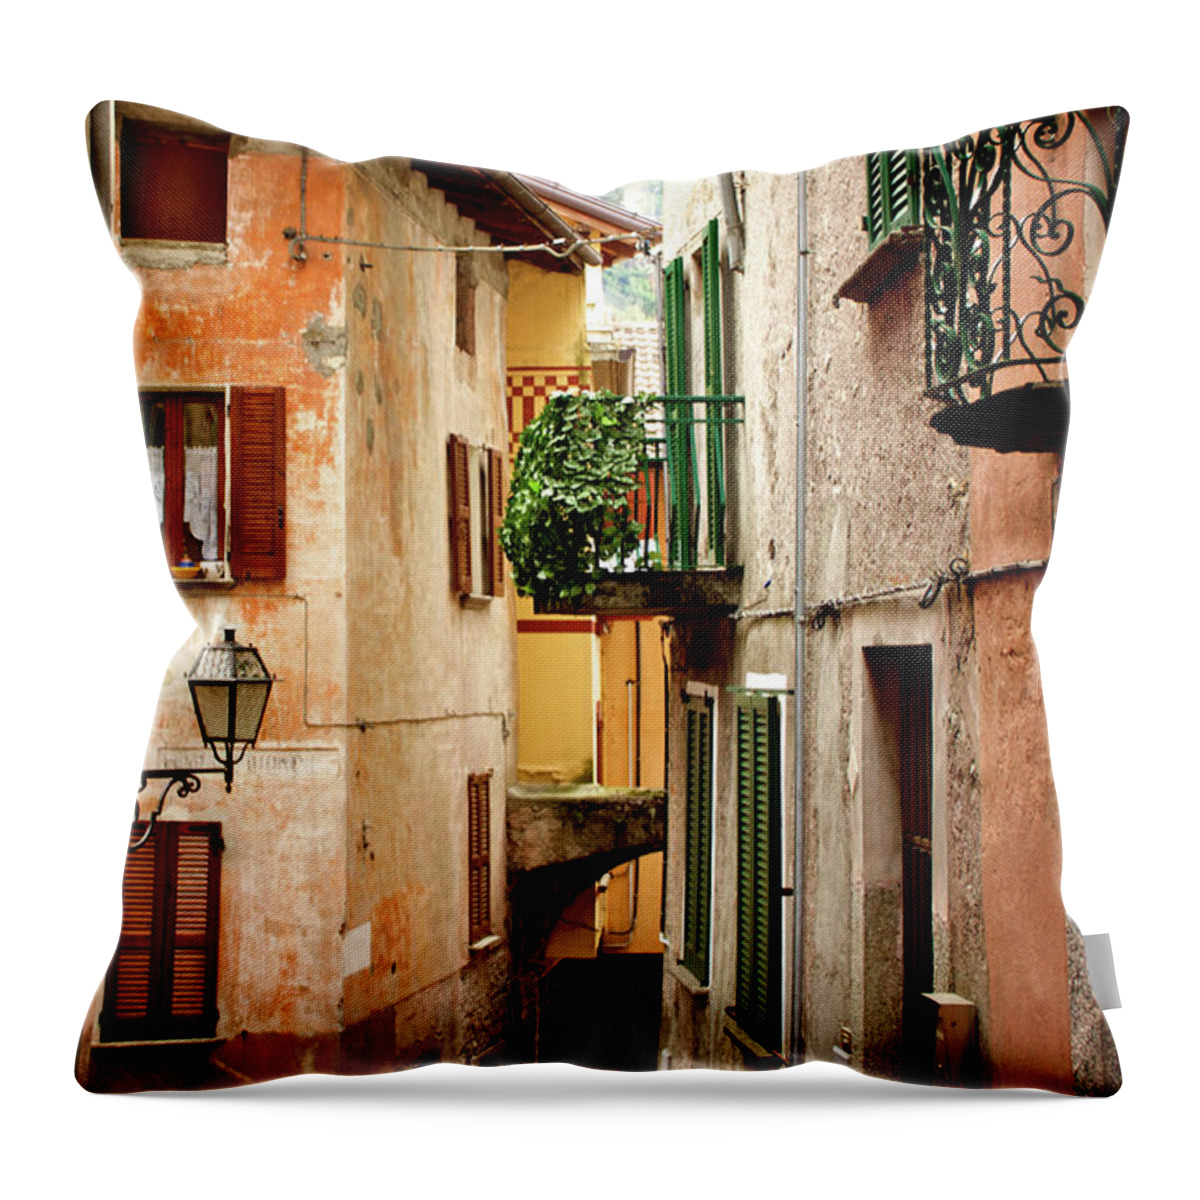 Residential District Throw Pillow featuring the photograph Argegno Crop by Andrea Costa Photography